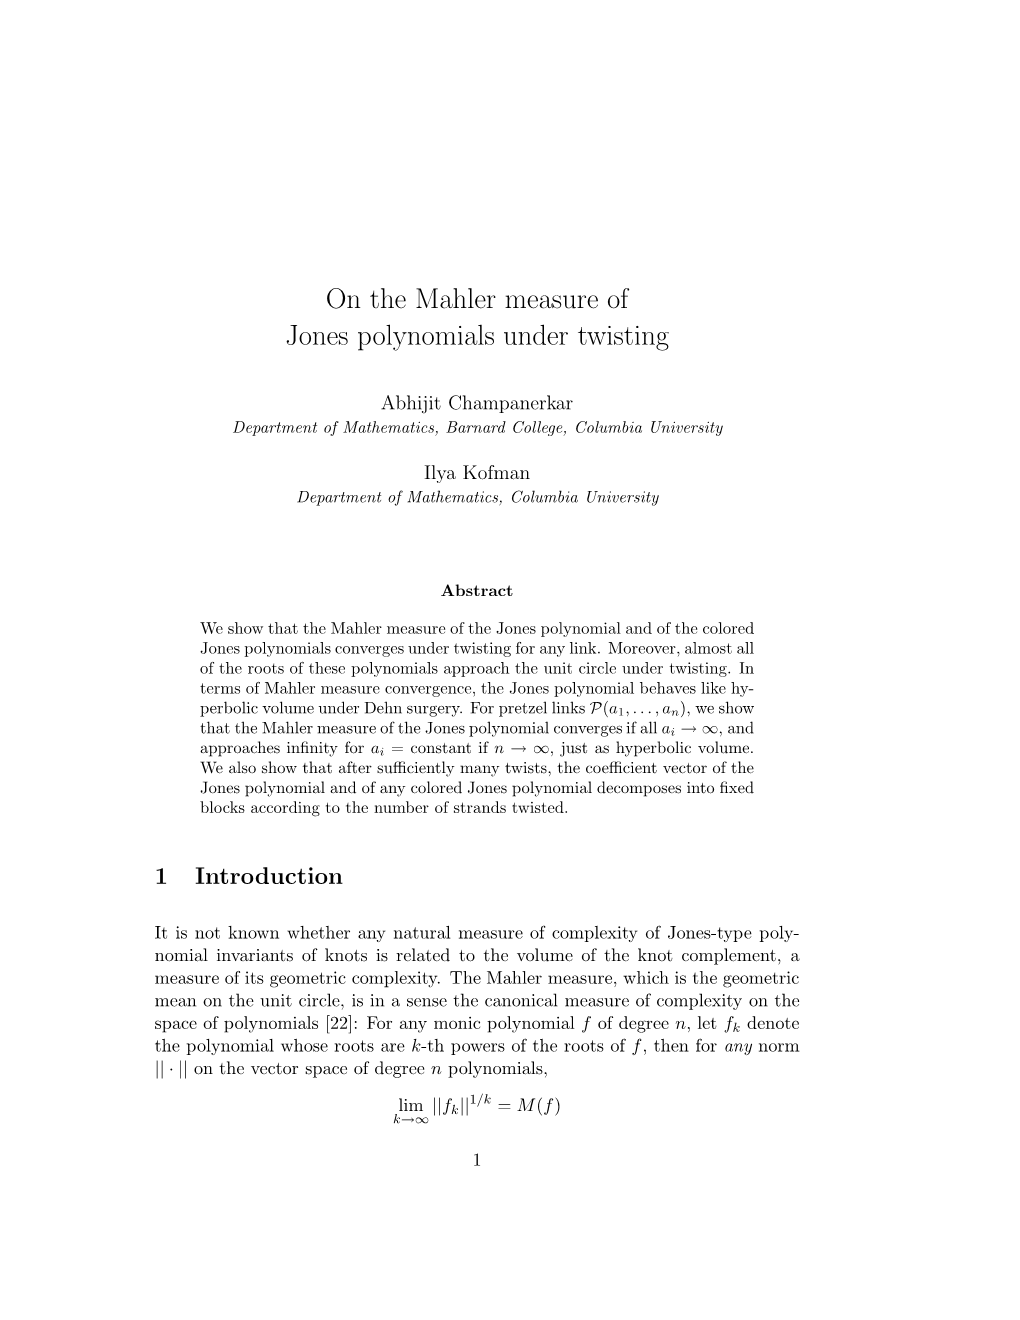 On the Mahler Measure of Jones Polynomials Under Twisting